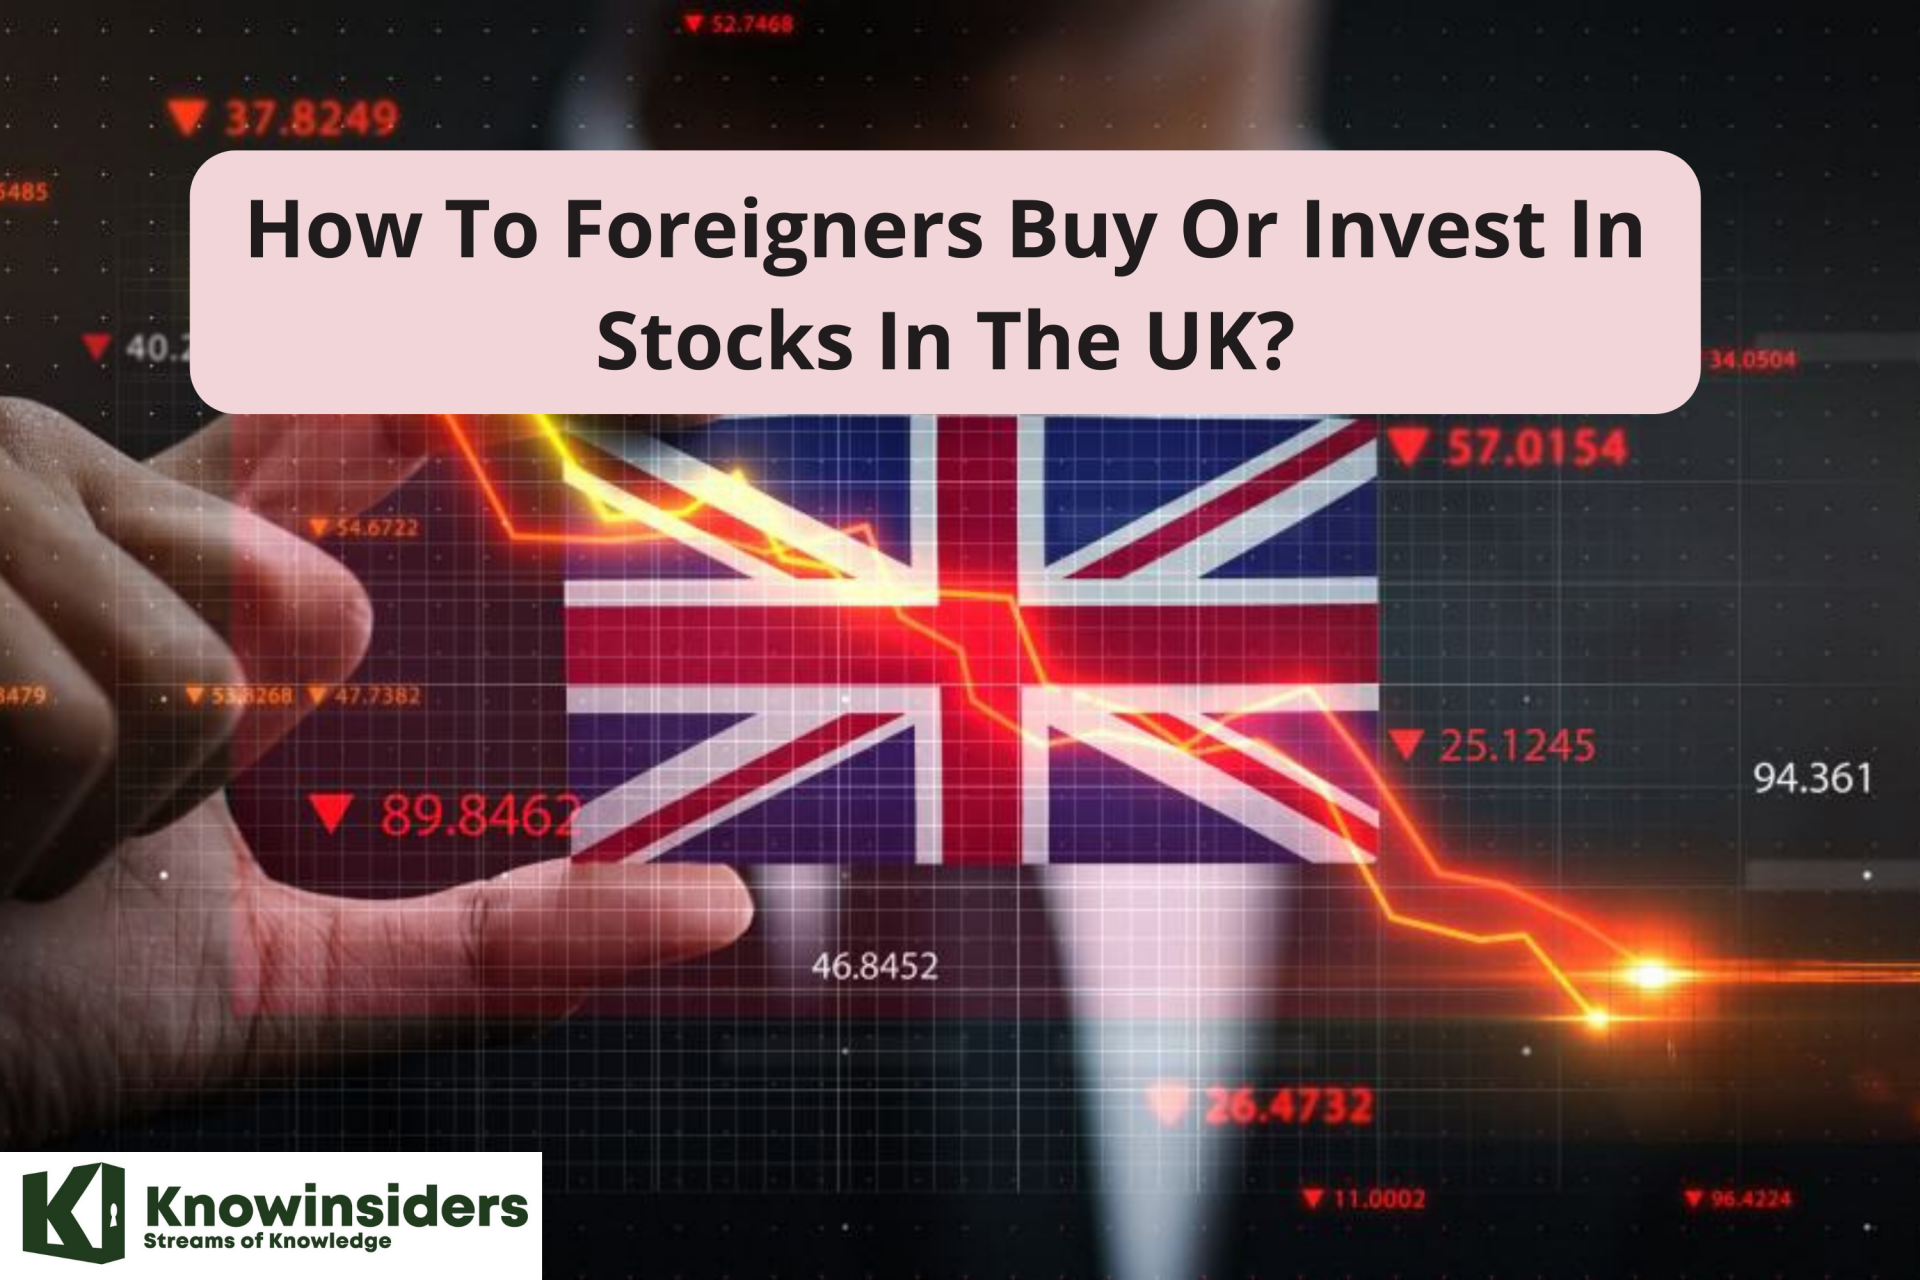 Can Foreigners Buy Or Invest In UK Stock Market?